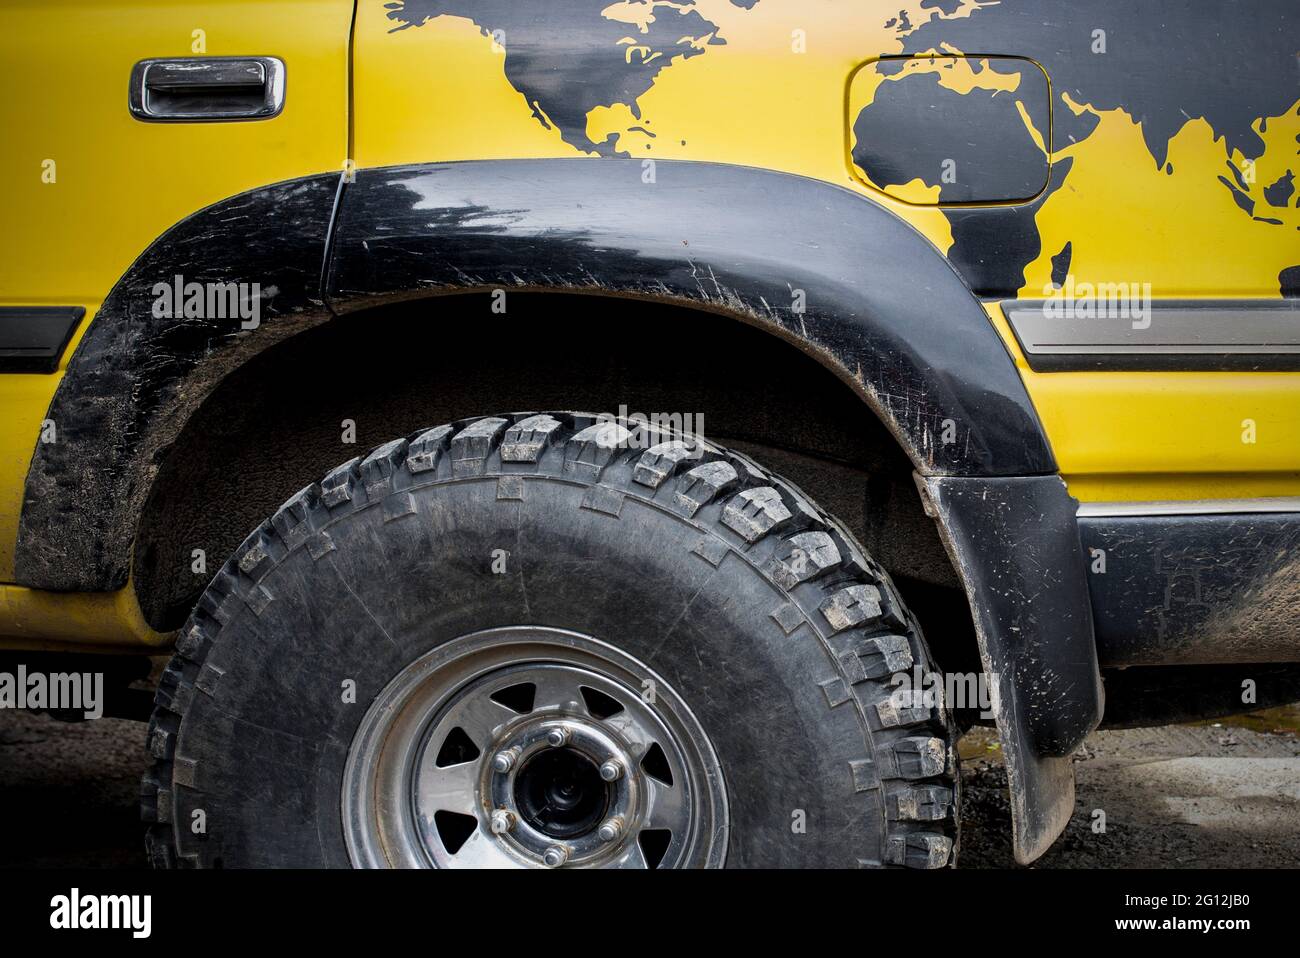 World traveller off road vehicle. A world map is painted over rear wheel. Stock Photo